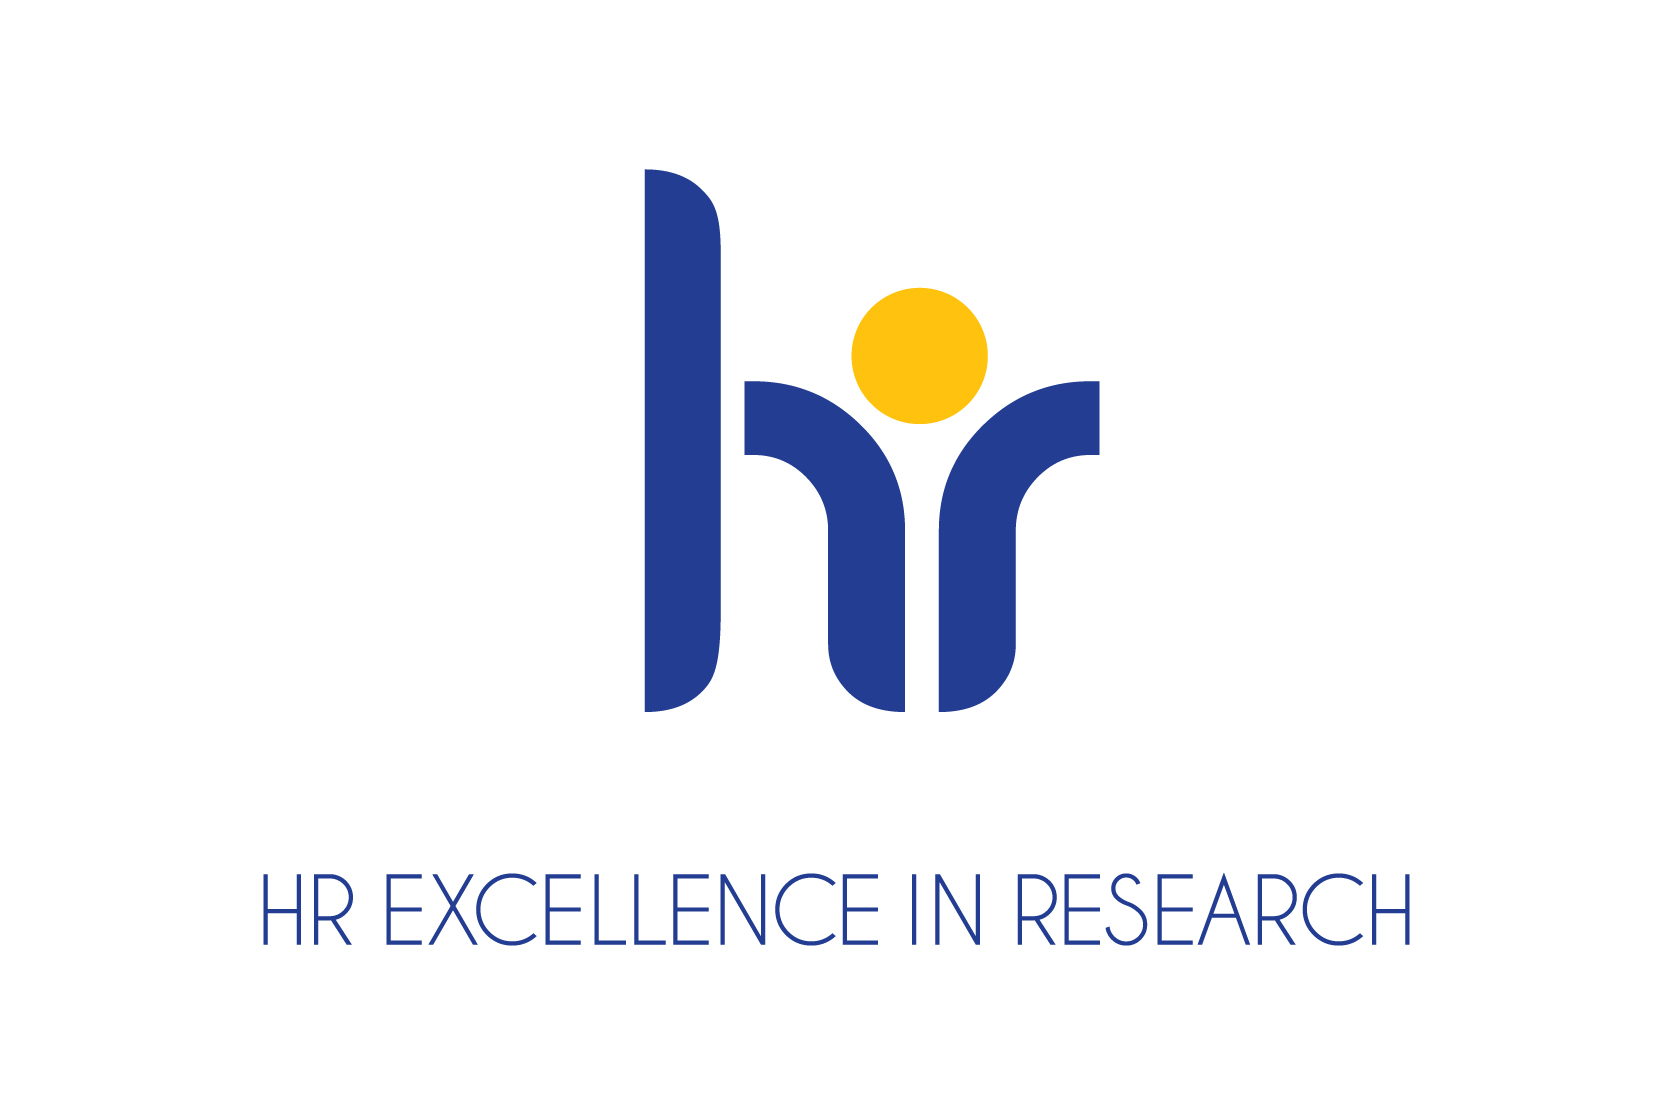 The University of Economics in Bratislava received the prestigious "HR Excellence in Research" award